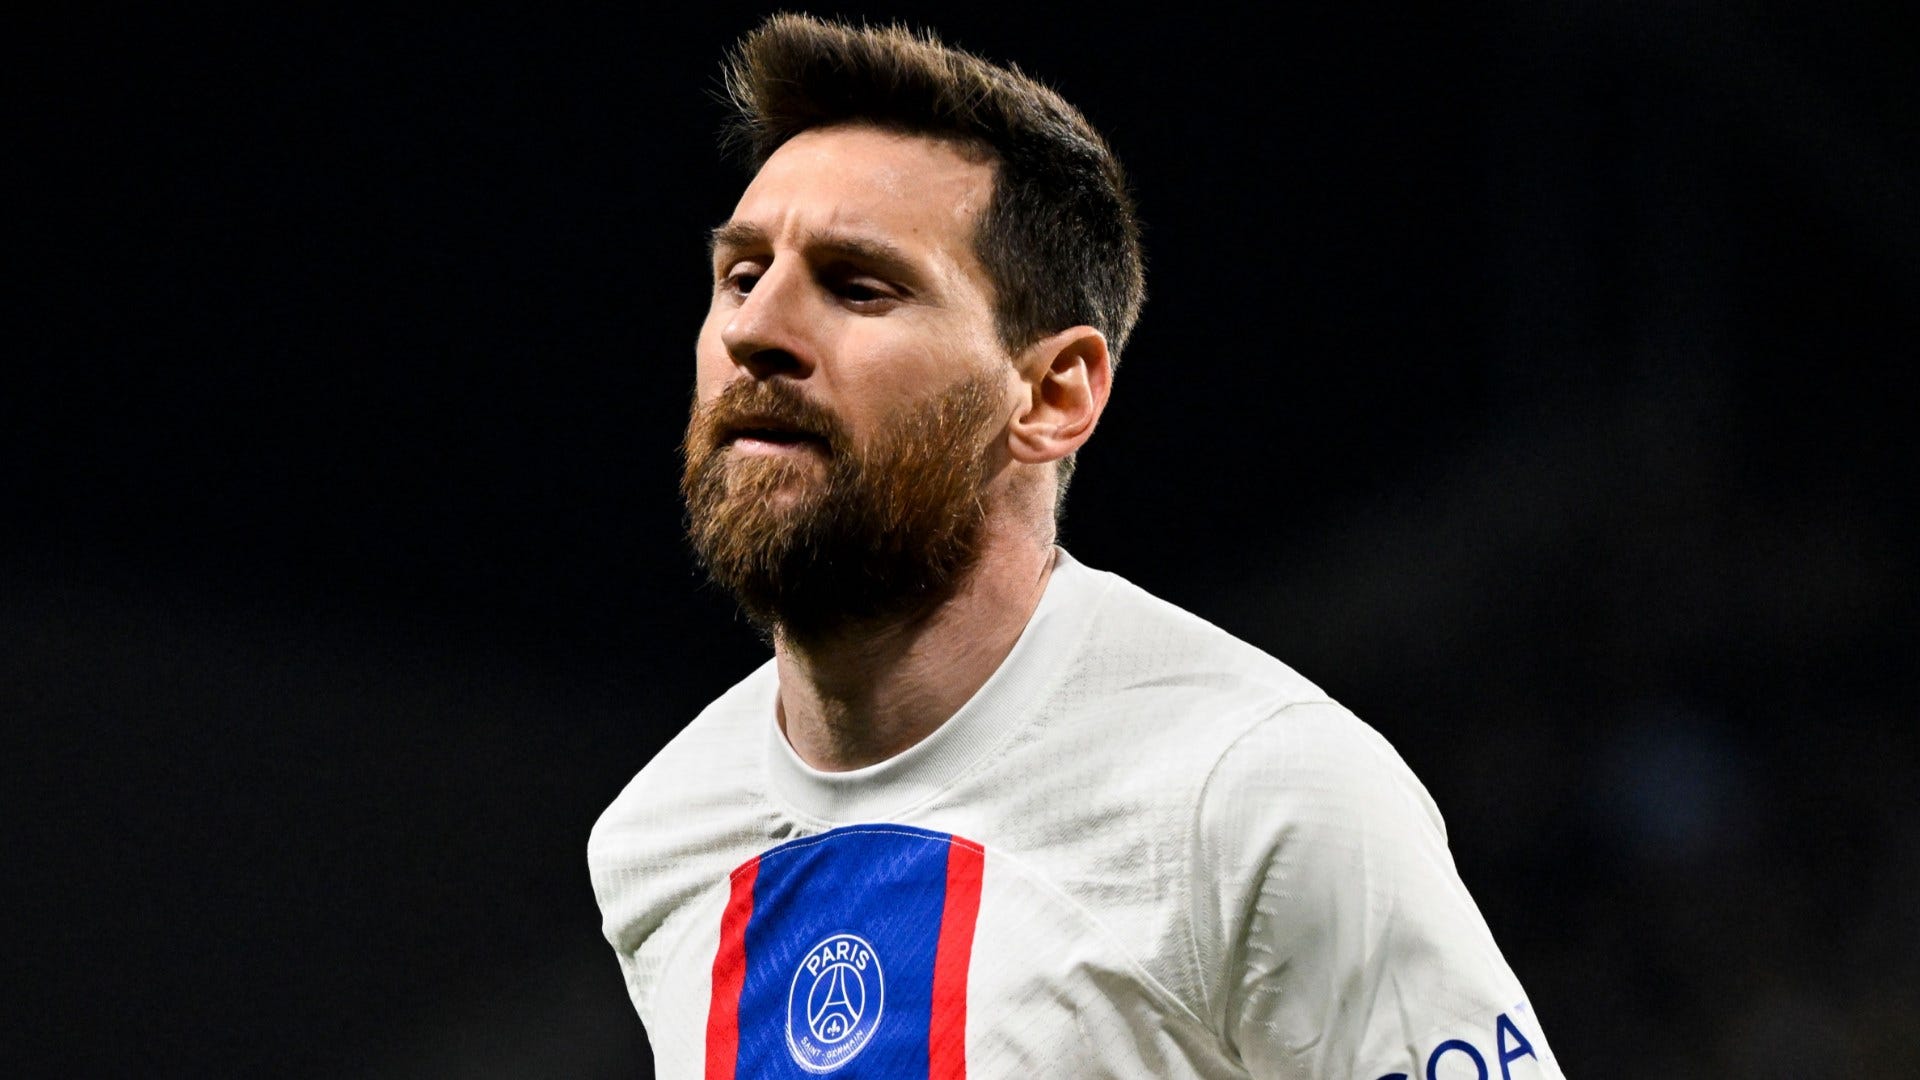 Explained: Why Lionel Messi is in a rush to make a decision on his future - despite him leaving PSG at the end of the month